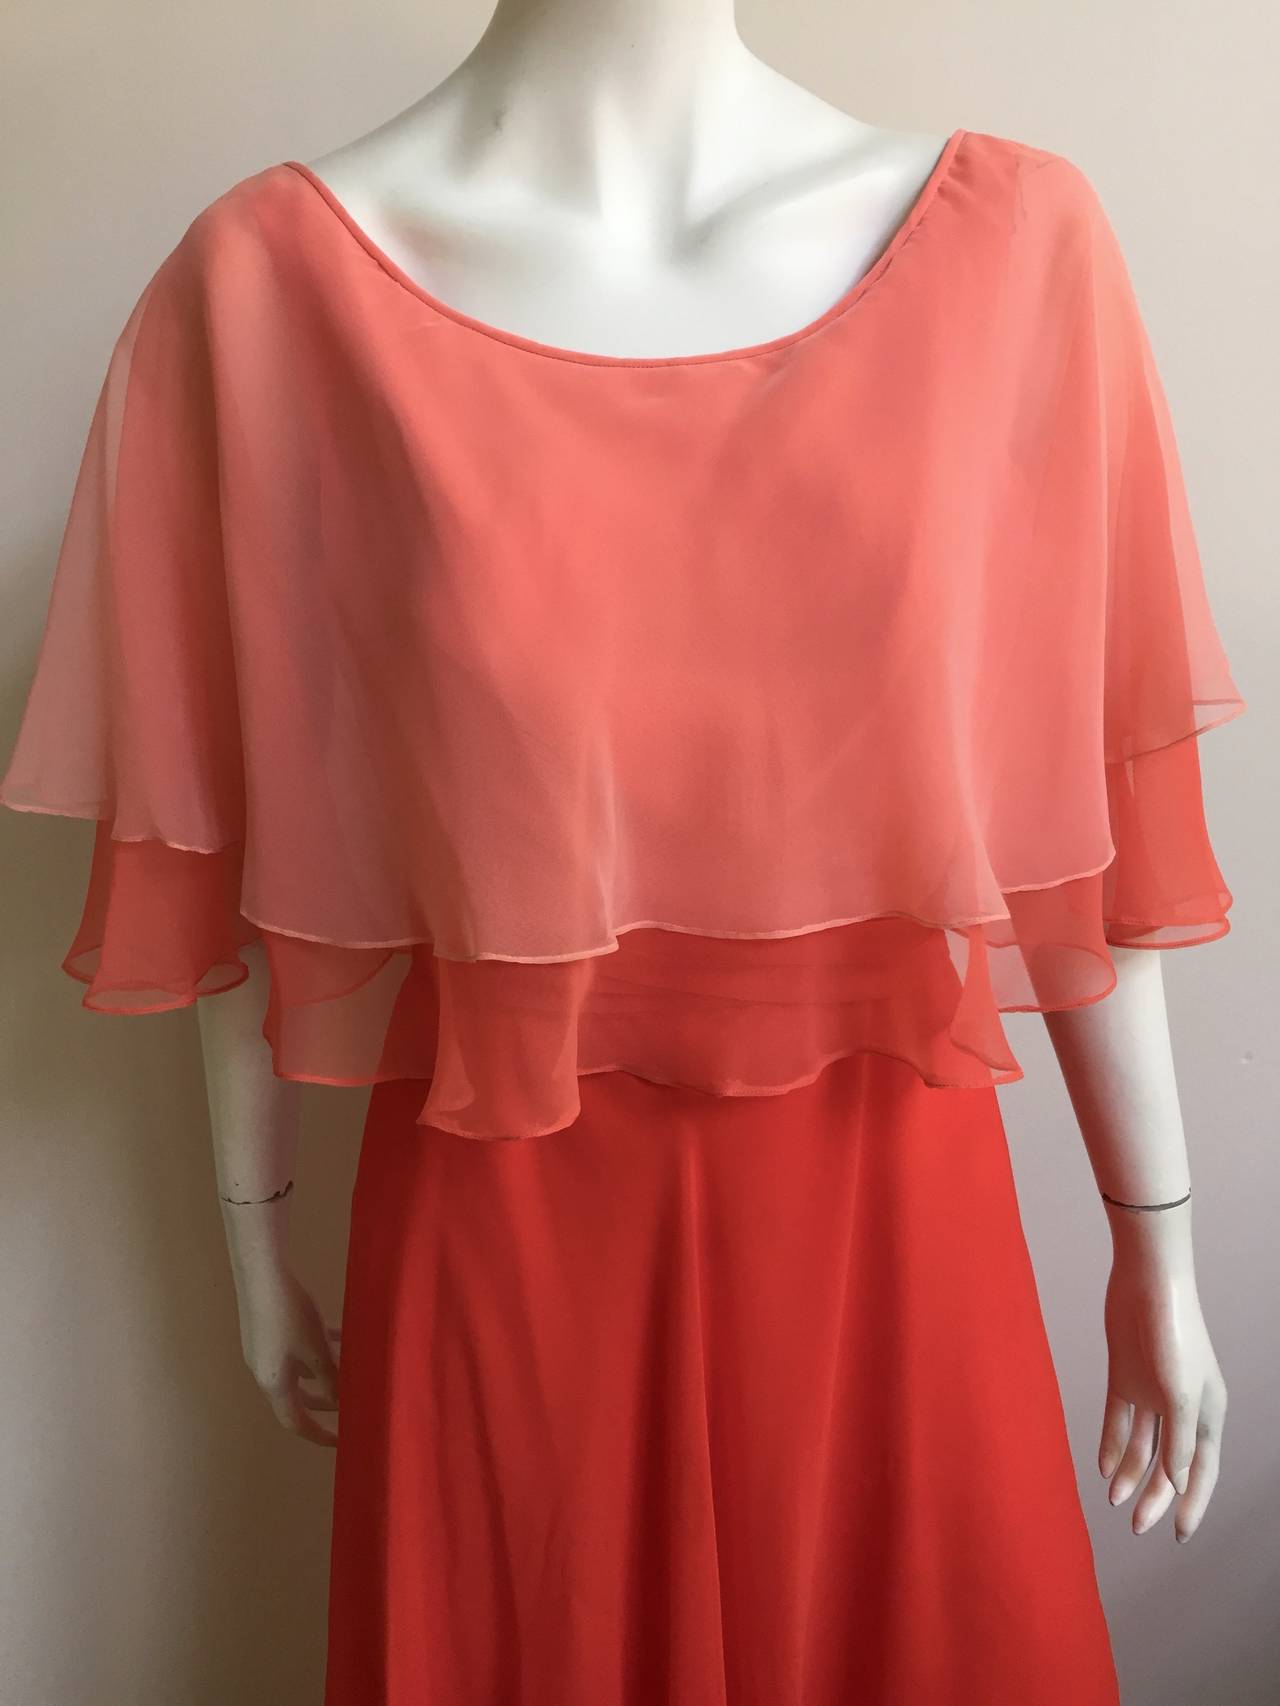 Mollie Parnis Boutique New York 1970s silk chiffon layered gown is a vintage size 14 but fits like a modern USA size 6.  Please see & use measurements to make certain this gown will fit you to perfection. Peach & orange layers of silk chiffon make